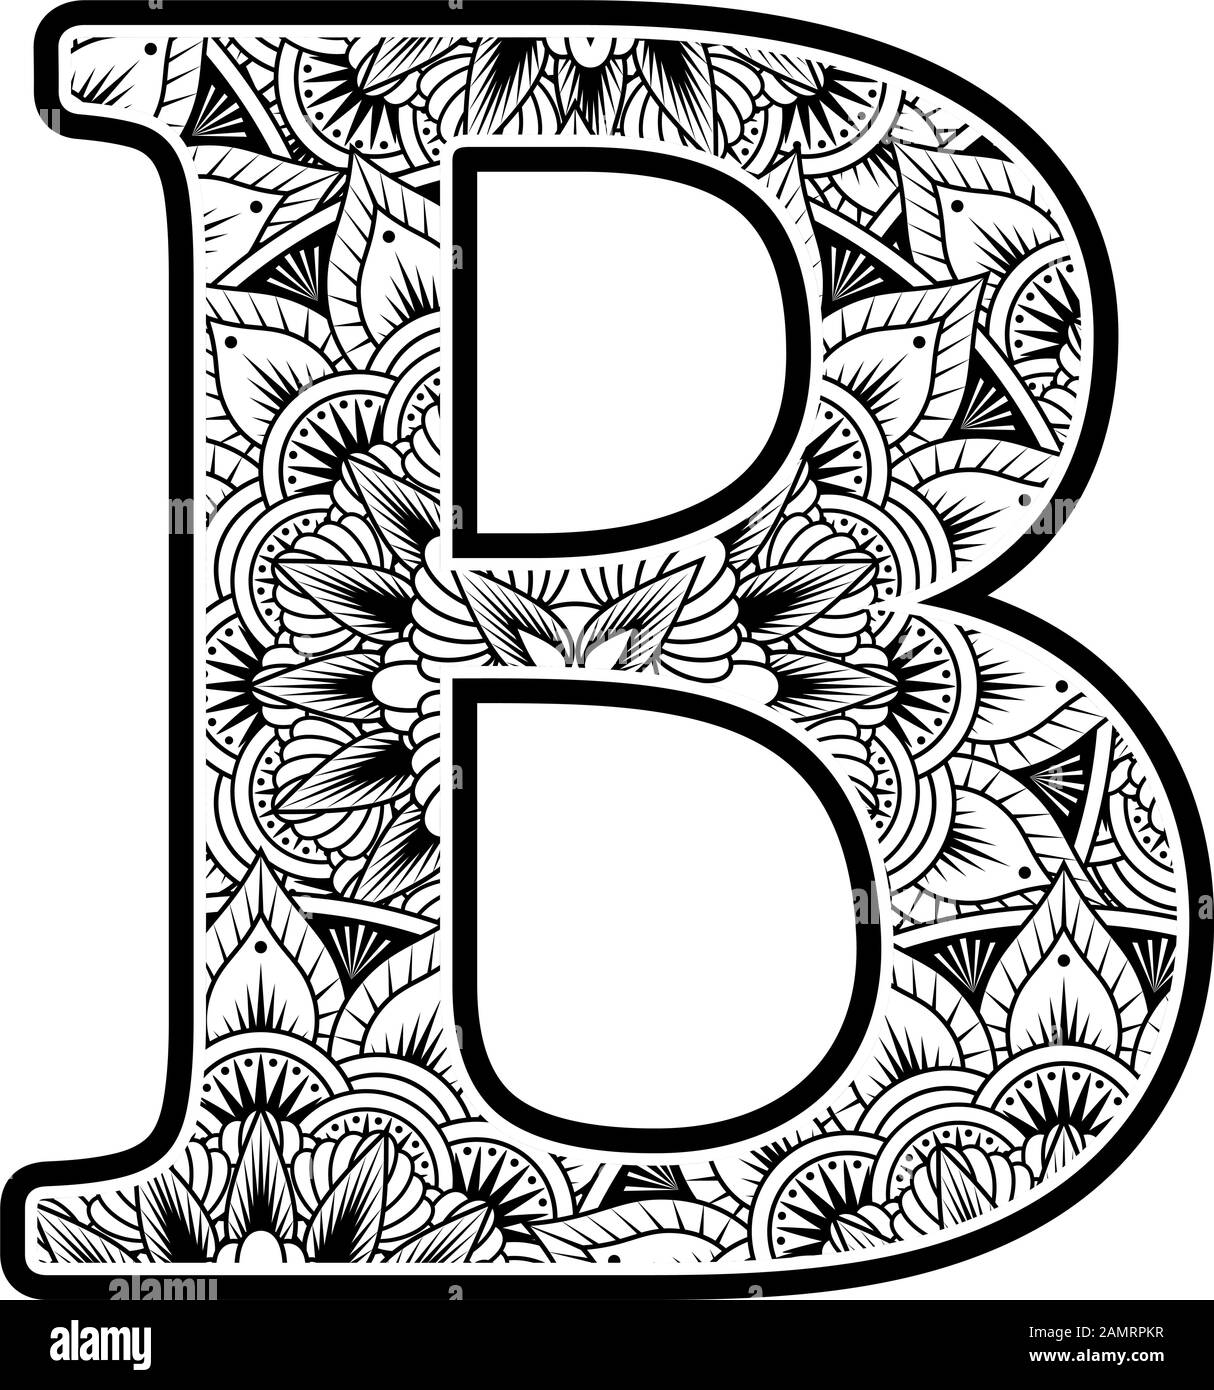 capital letter b with abstract flowers ornaments in black and white. design inspired from mandala art style for coloring. Isolated on white background Stock Vector